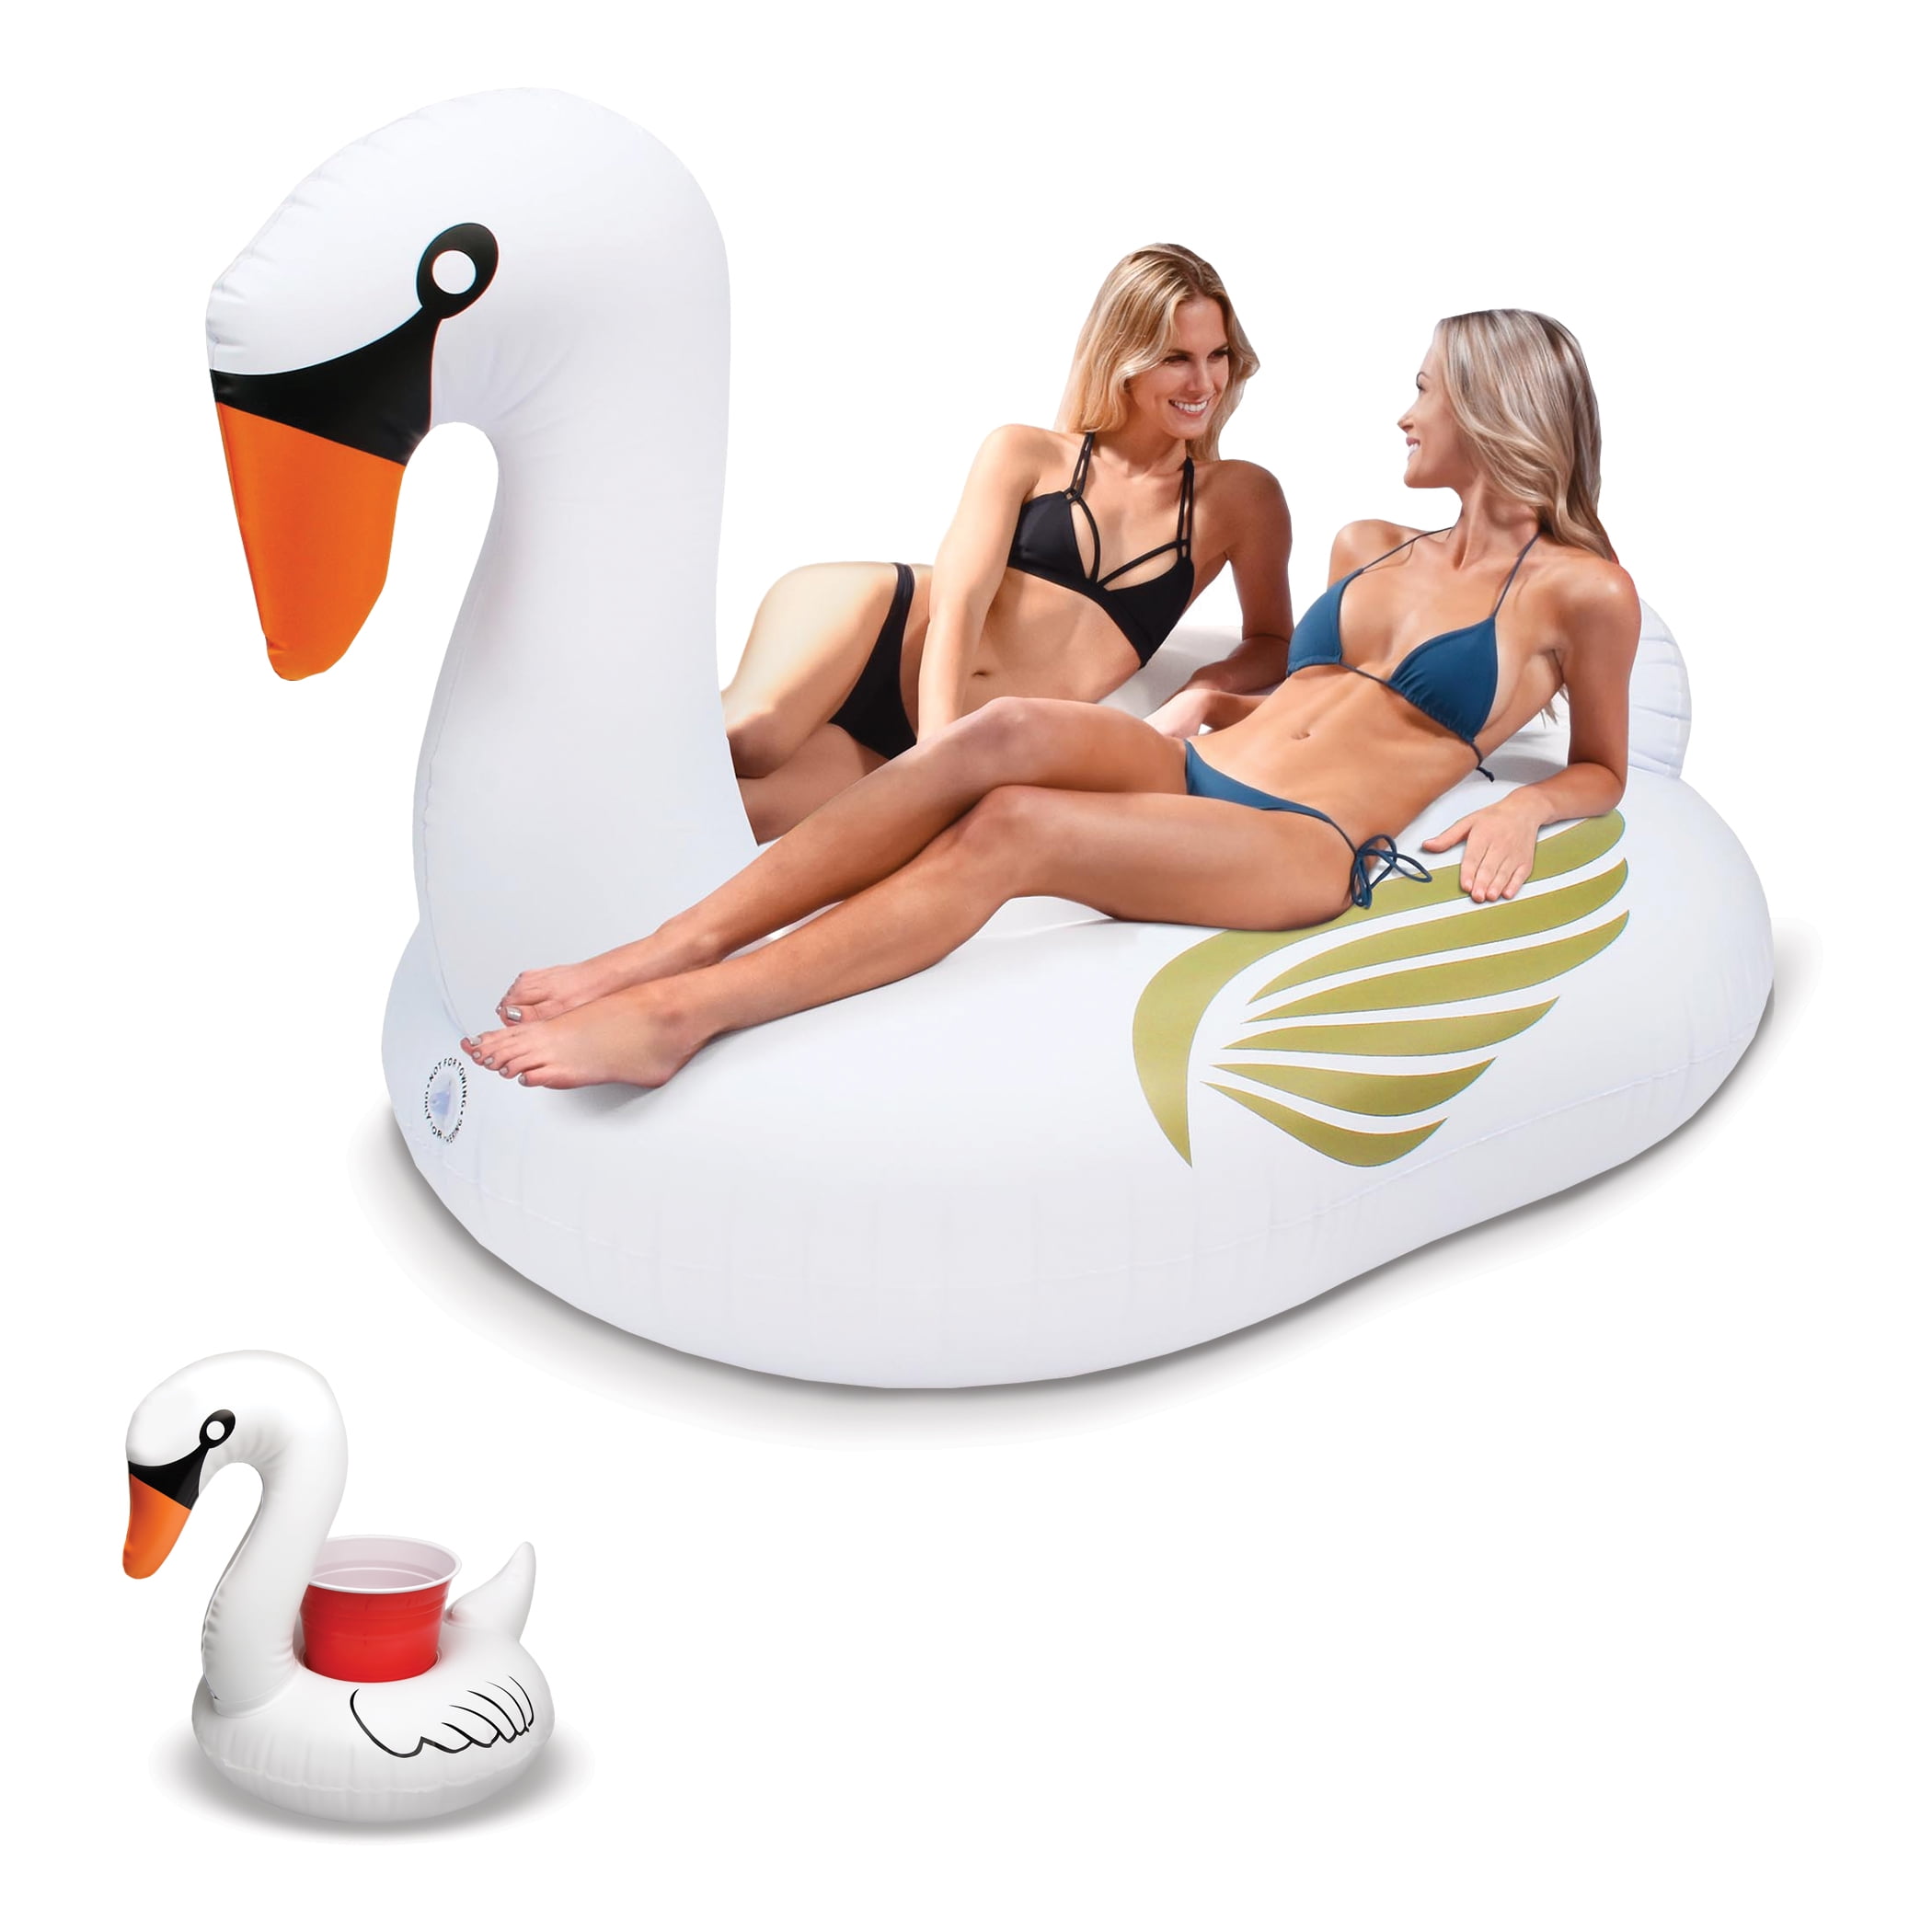 3 X GoFloats Floating White Swan Drink Floats Float Your Drinks in Style for sale online